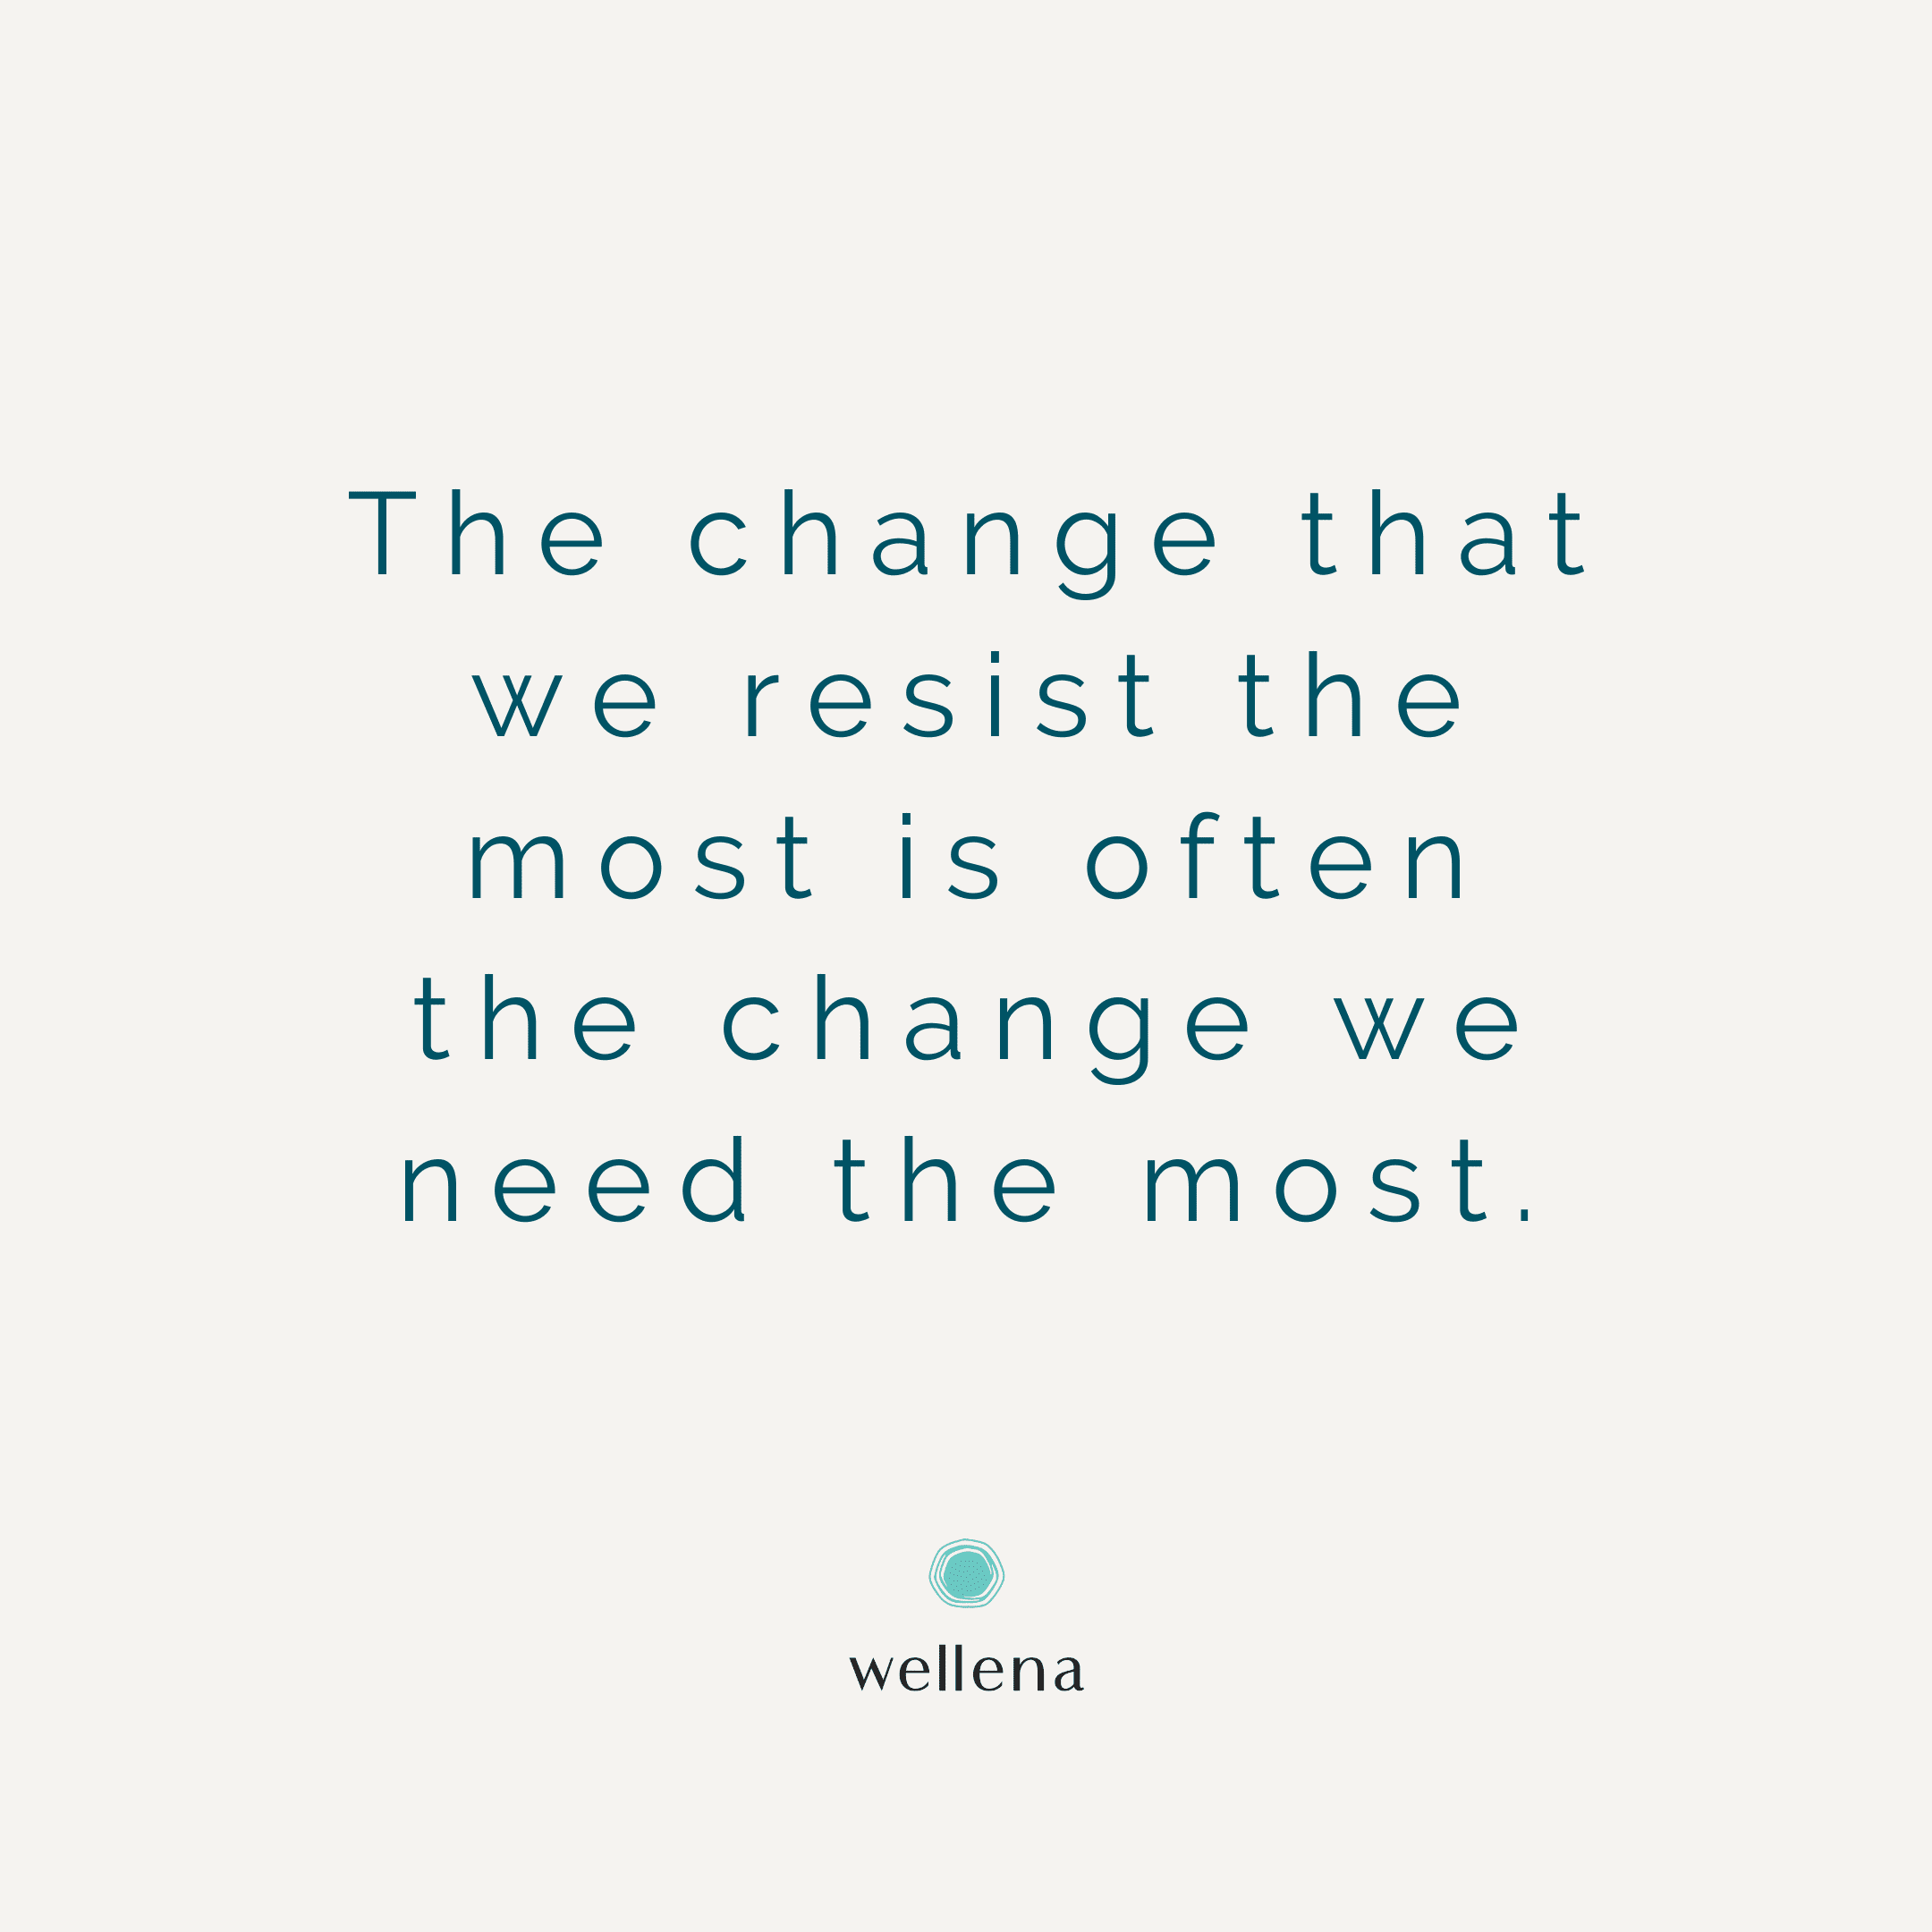 The change that we resist the most is the change we need the most.